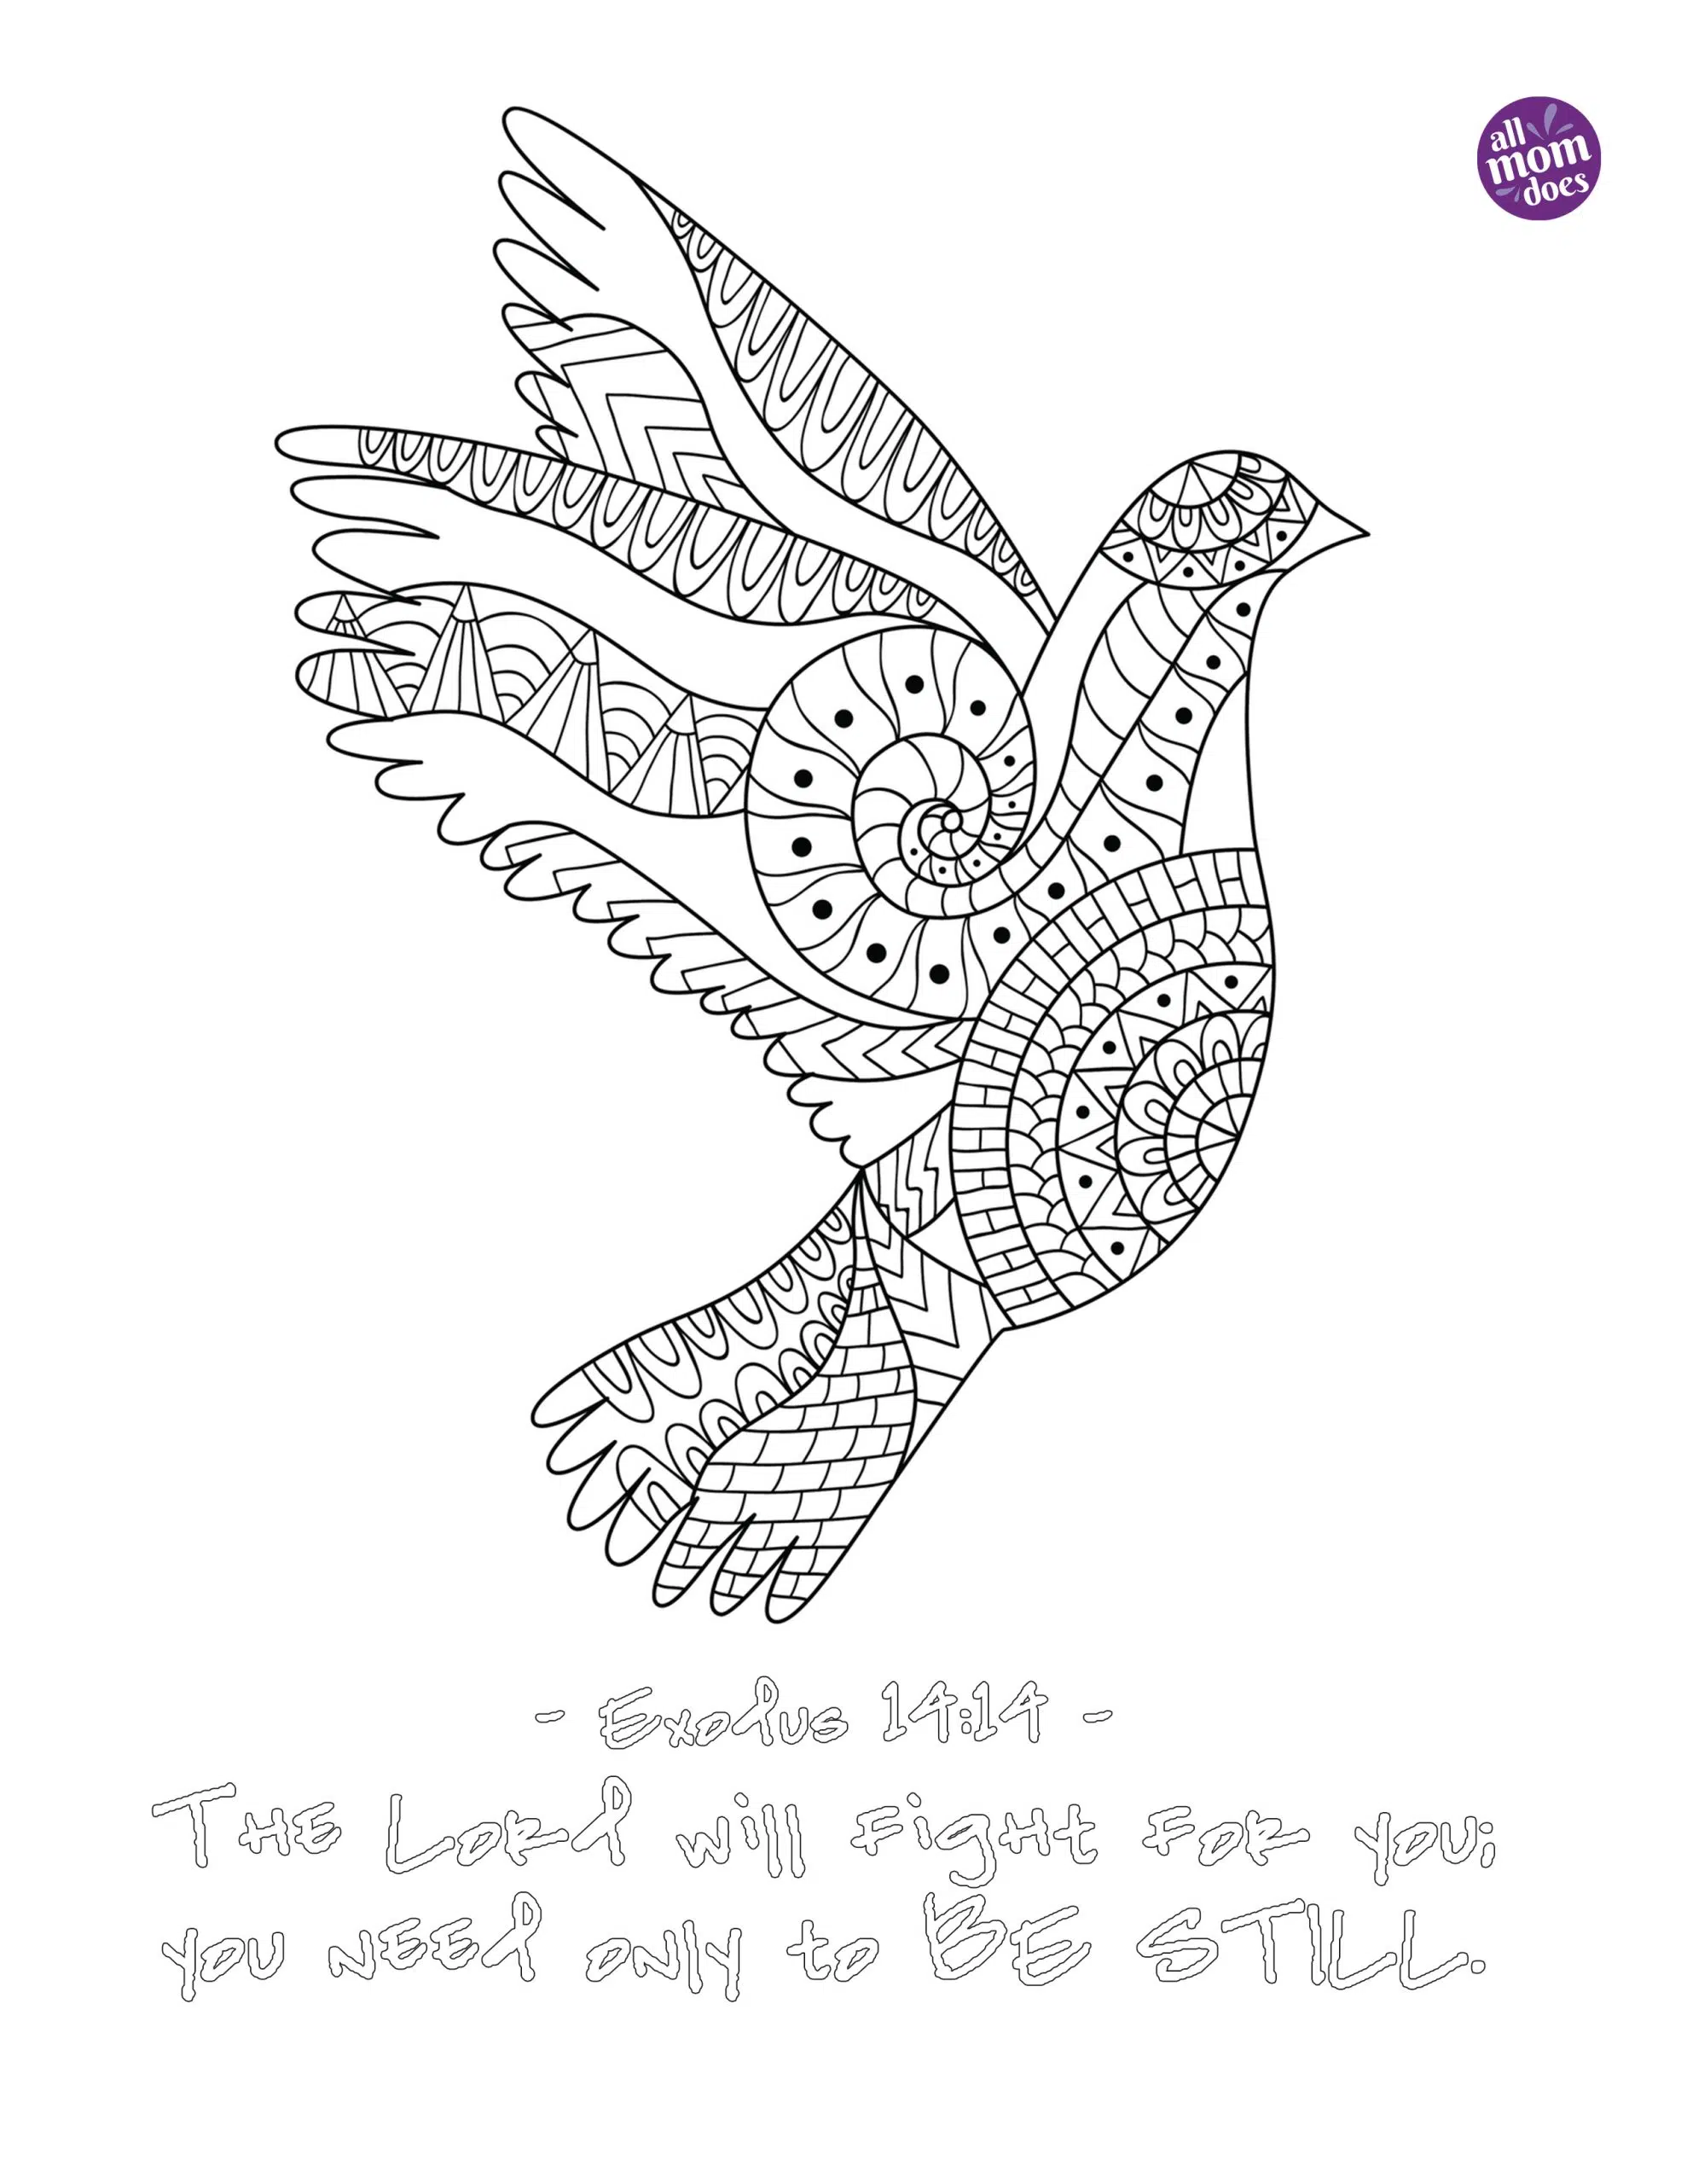 bible-memory-verse-coloring-page-exodus-14-14-allmomdoes